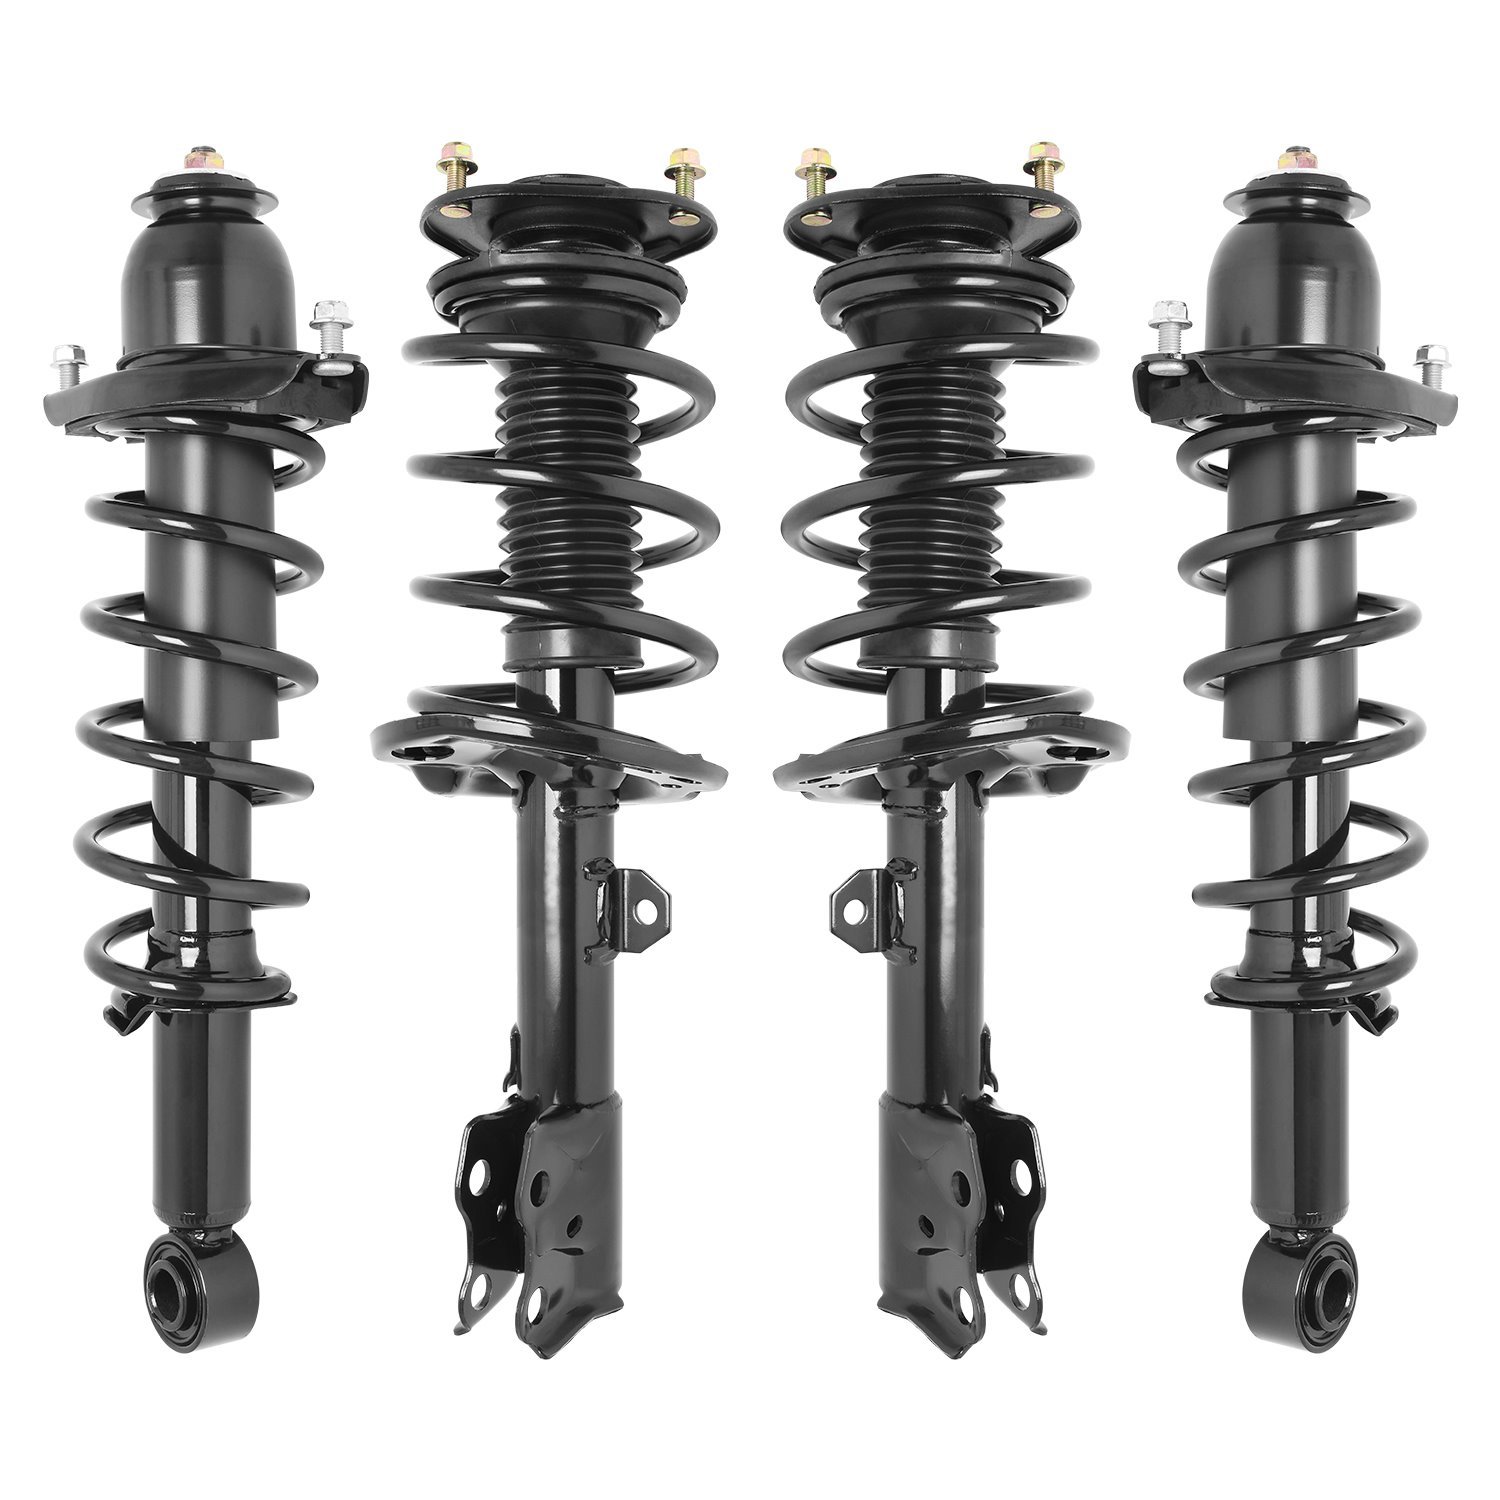 4-11585-15065-001 Front & Rear Suspension Strut & Coil Spring Assembly Kit Fits Select Toyota Corolla